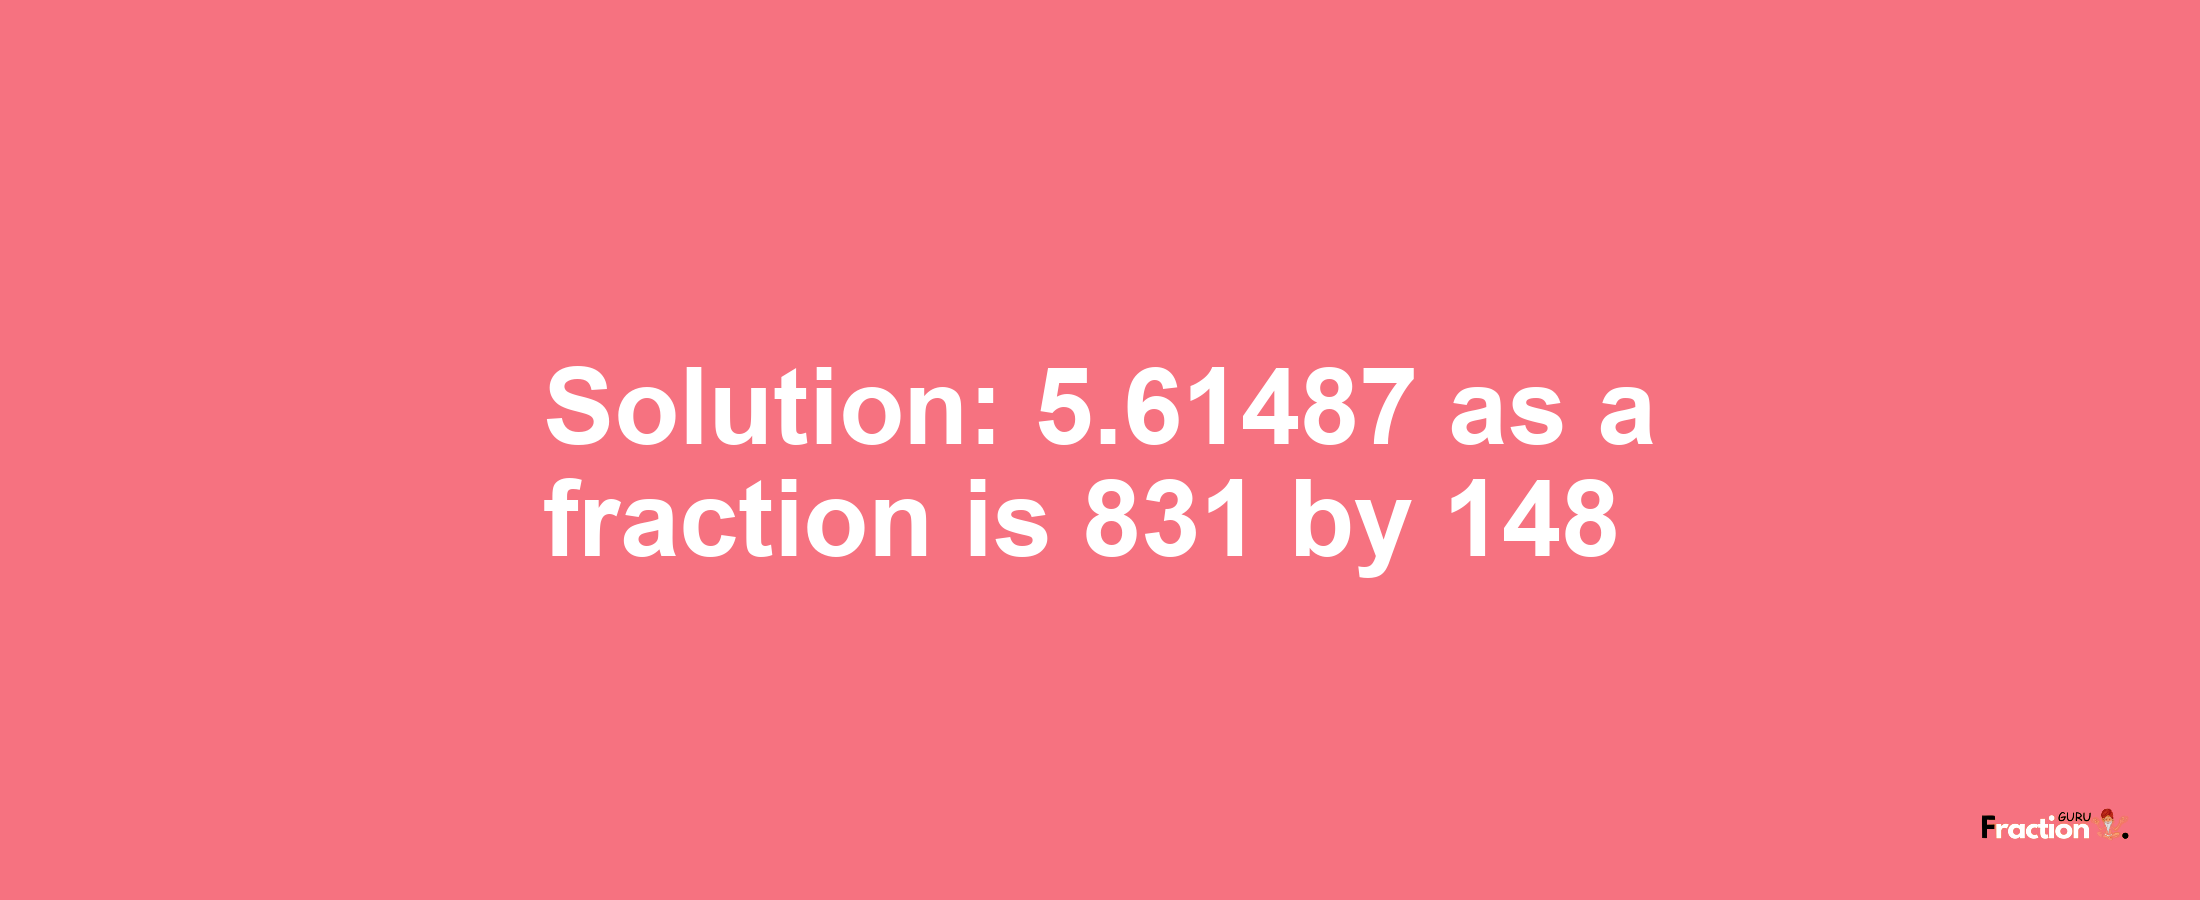 Solution:5.61487 as a fraction is 831/148